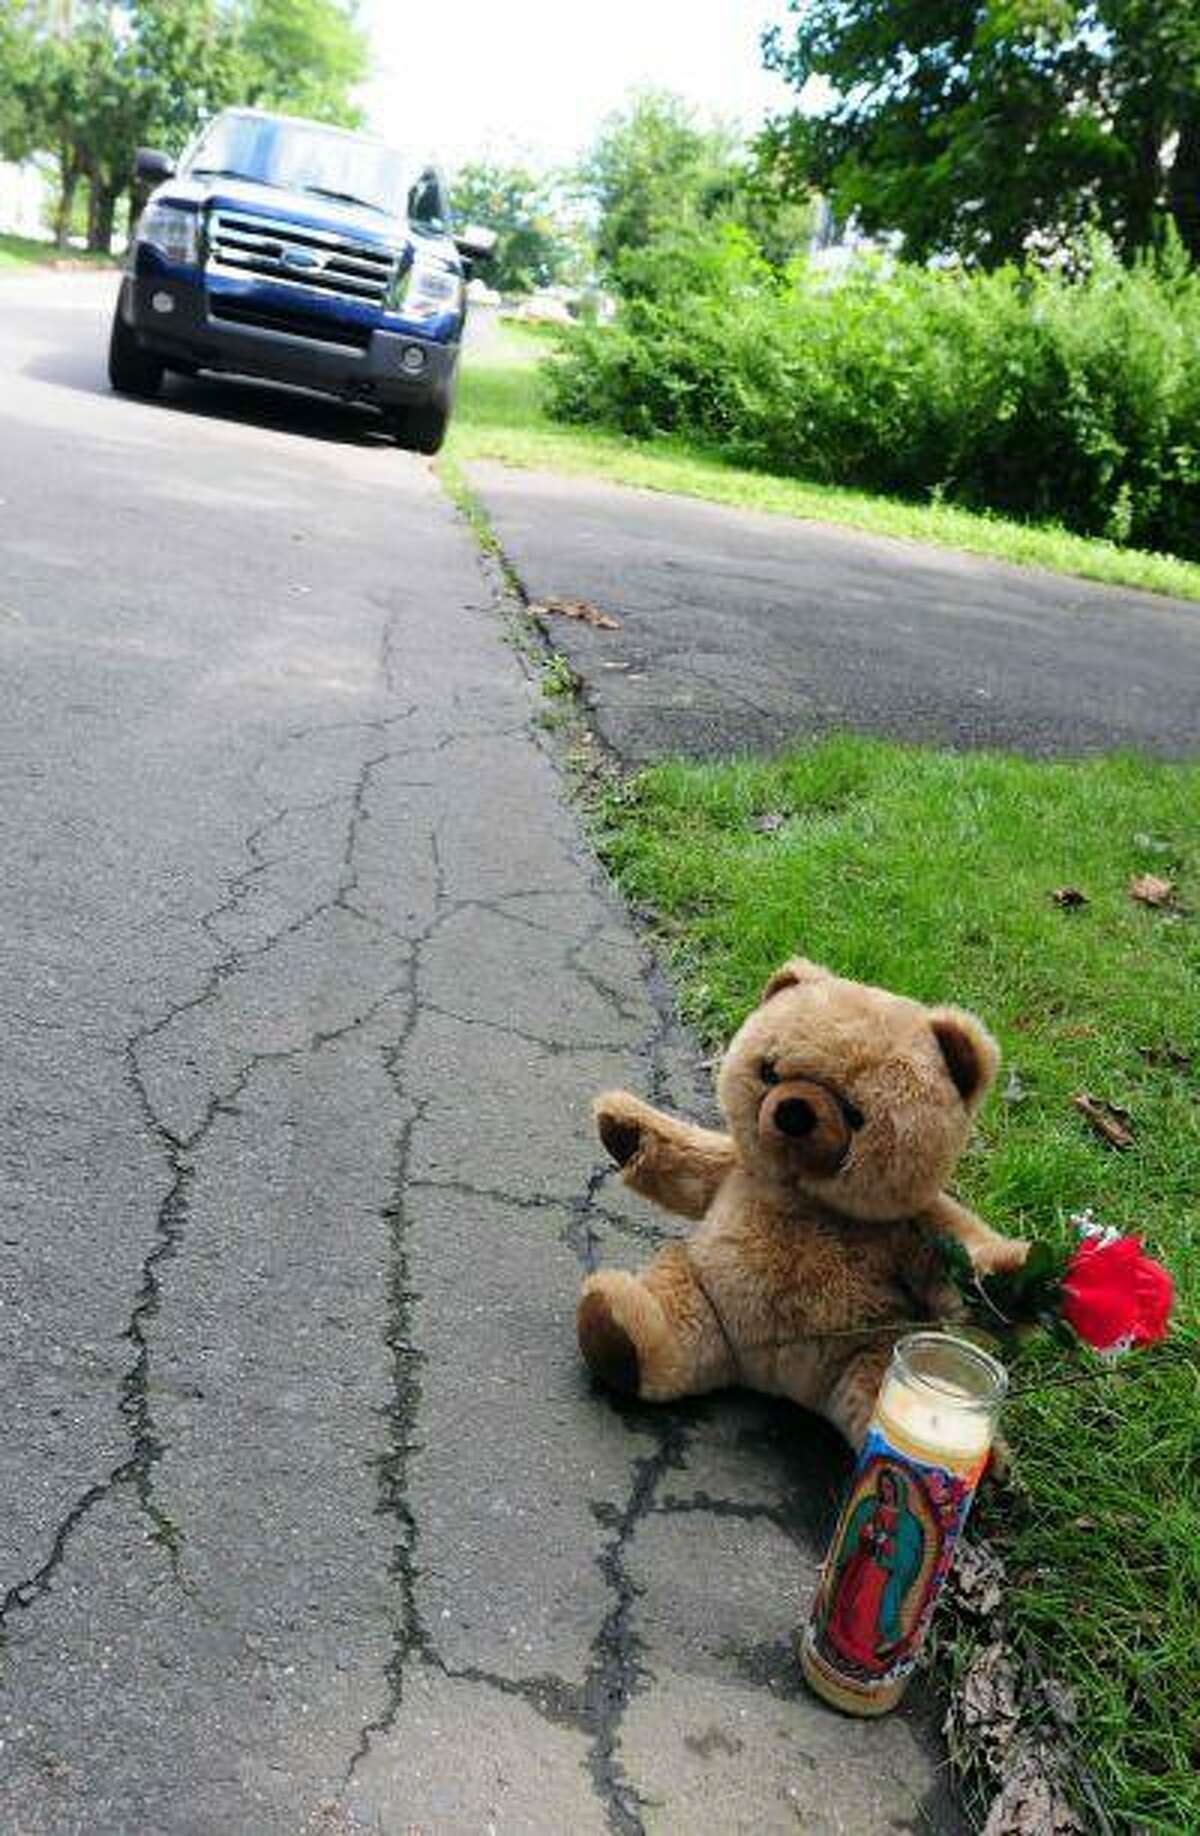 A teddy bear, flower and candle sit near the site on Saturday, Aug. 10, 2013 after a small plane, piloted by Bill Henningsgaard, crashed into two homes Friday in East Haven, Conn. Four people were killed in the incident. (AP Photo/The New Haven Register, Peter Hvizdak)